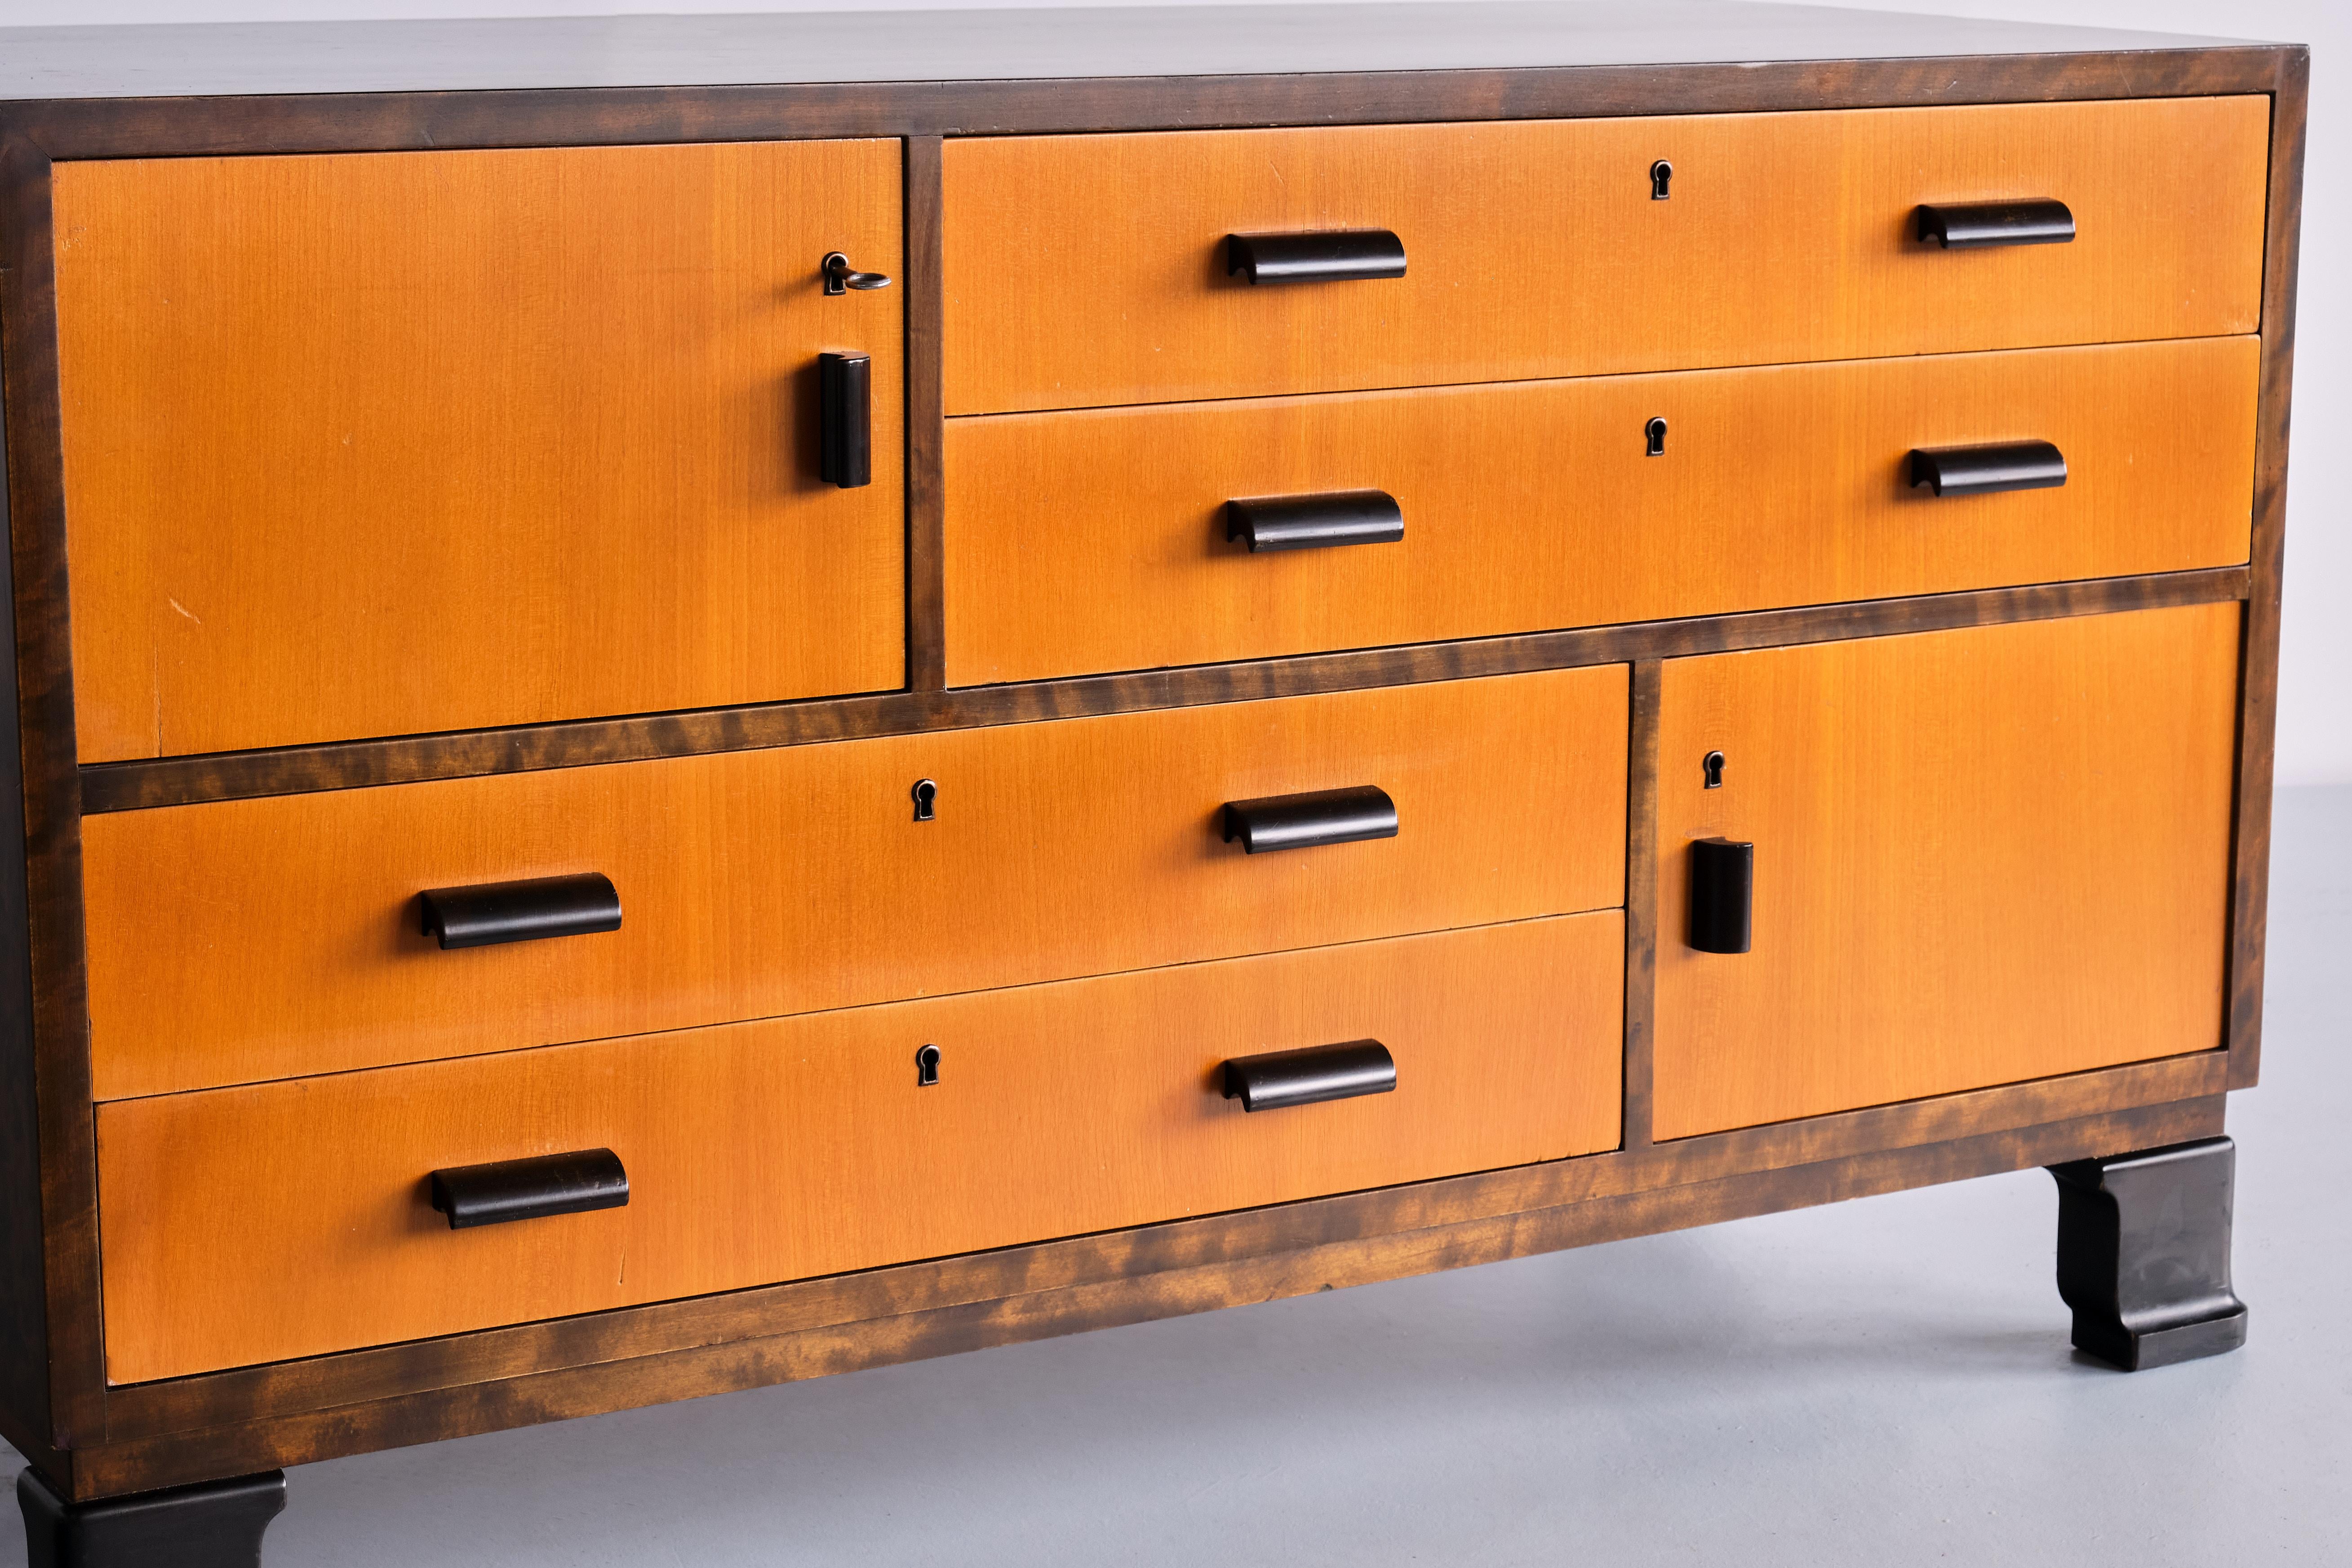 Pair of Axel Larsson Sideboards in Elm and Birch, SMF Bodafors, Sweden, 1940s For Sale 4